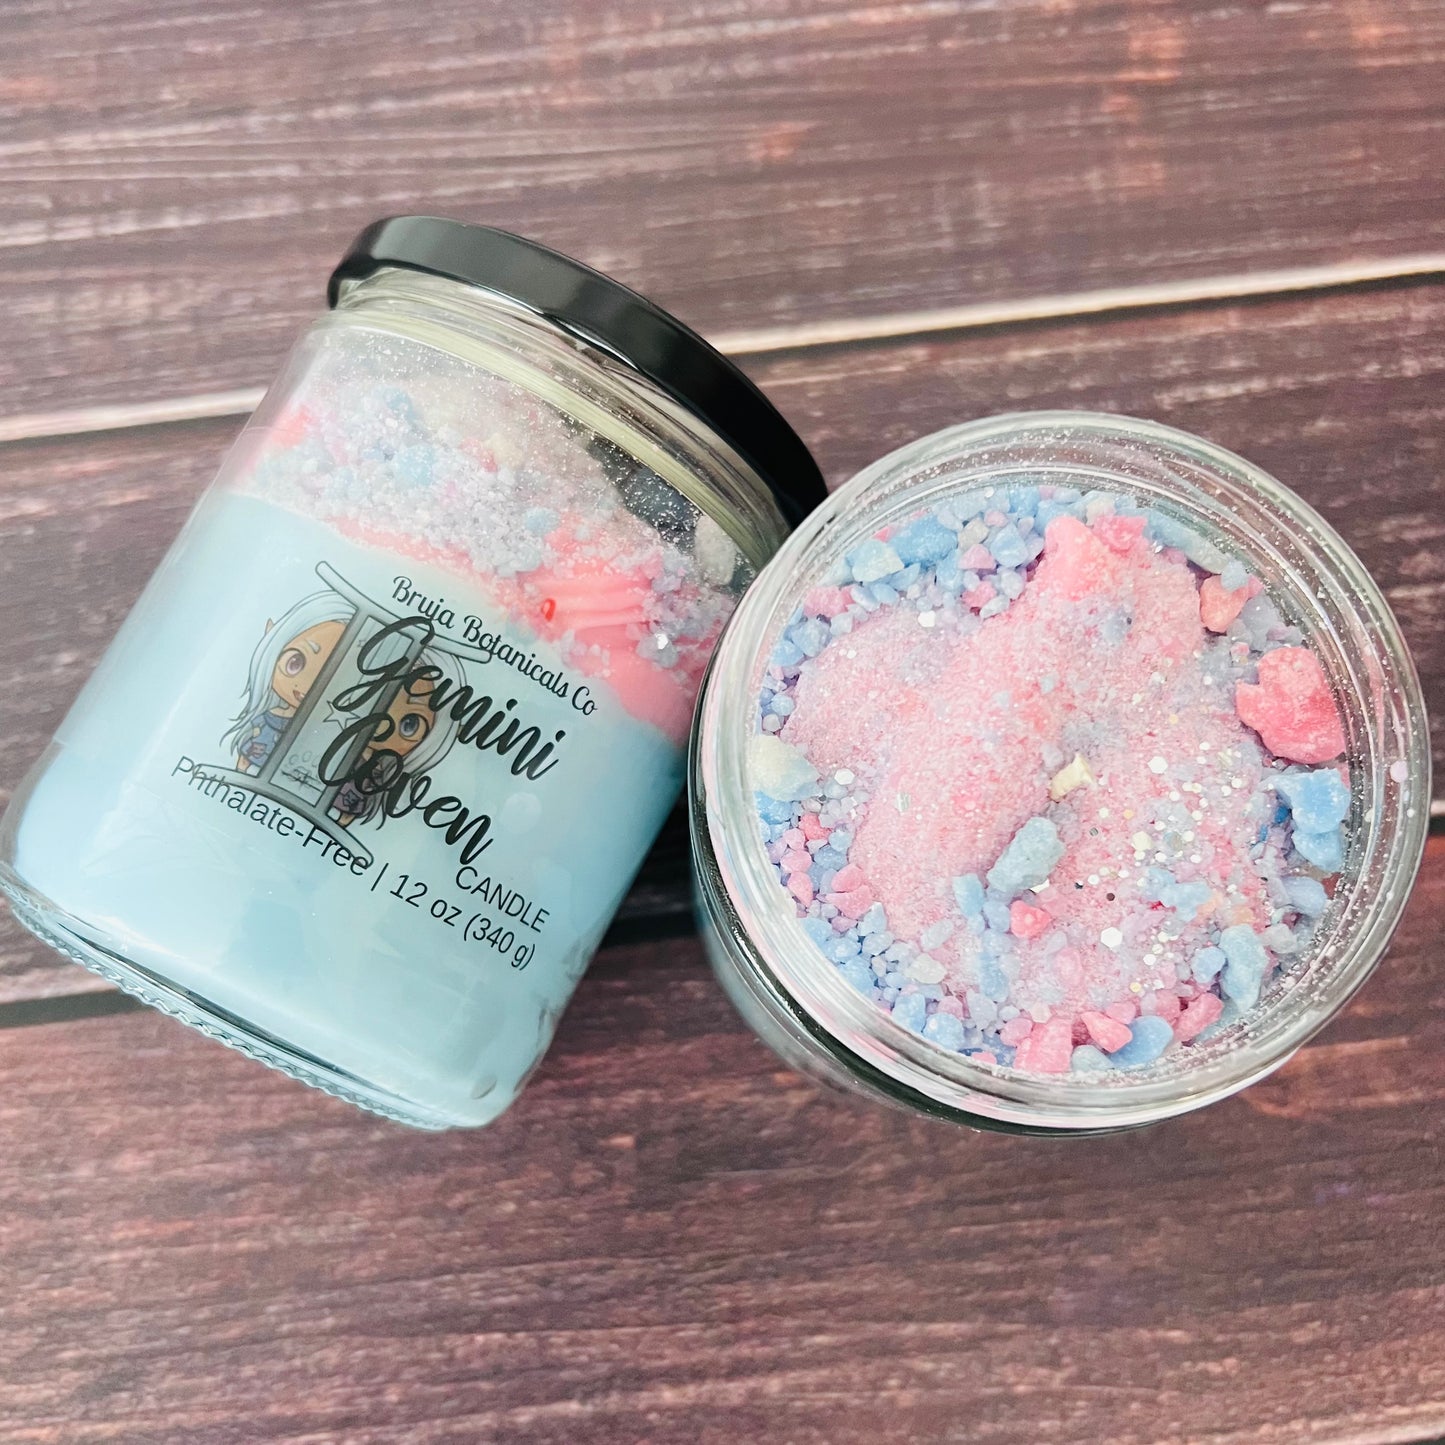 Gemini Coven Whipped Candle (TVD inspired)